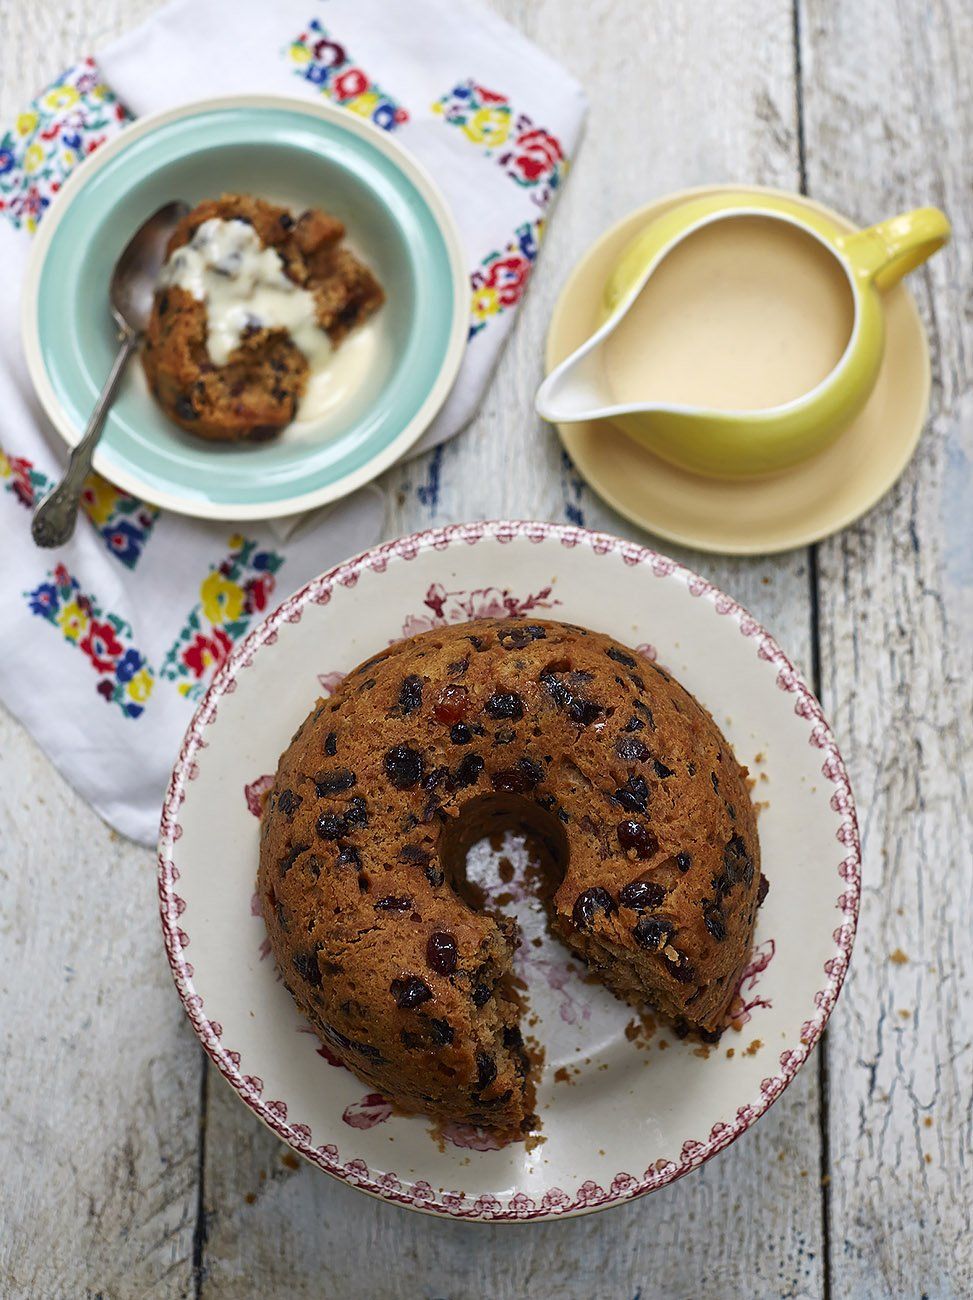 Classic spotted dick